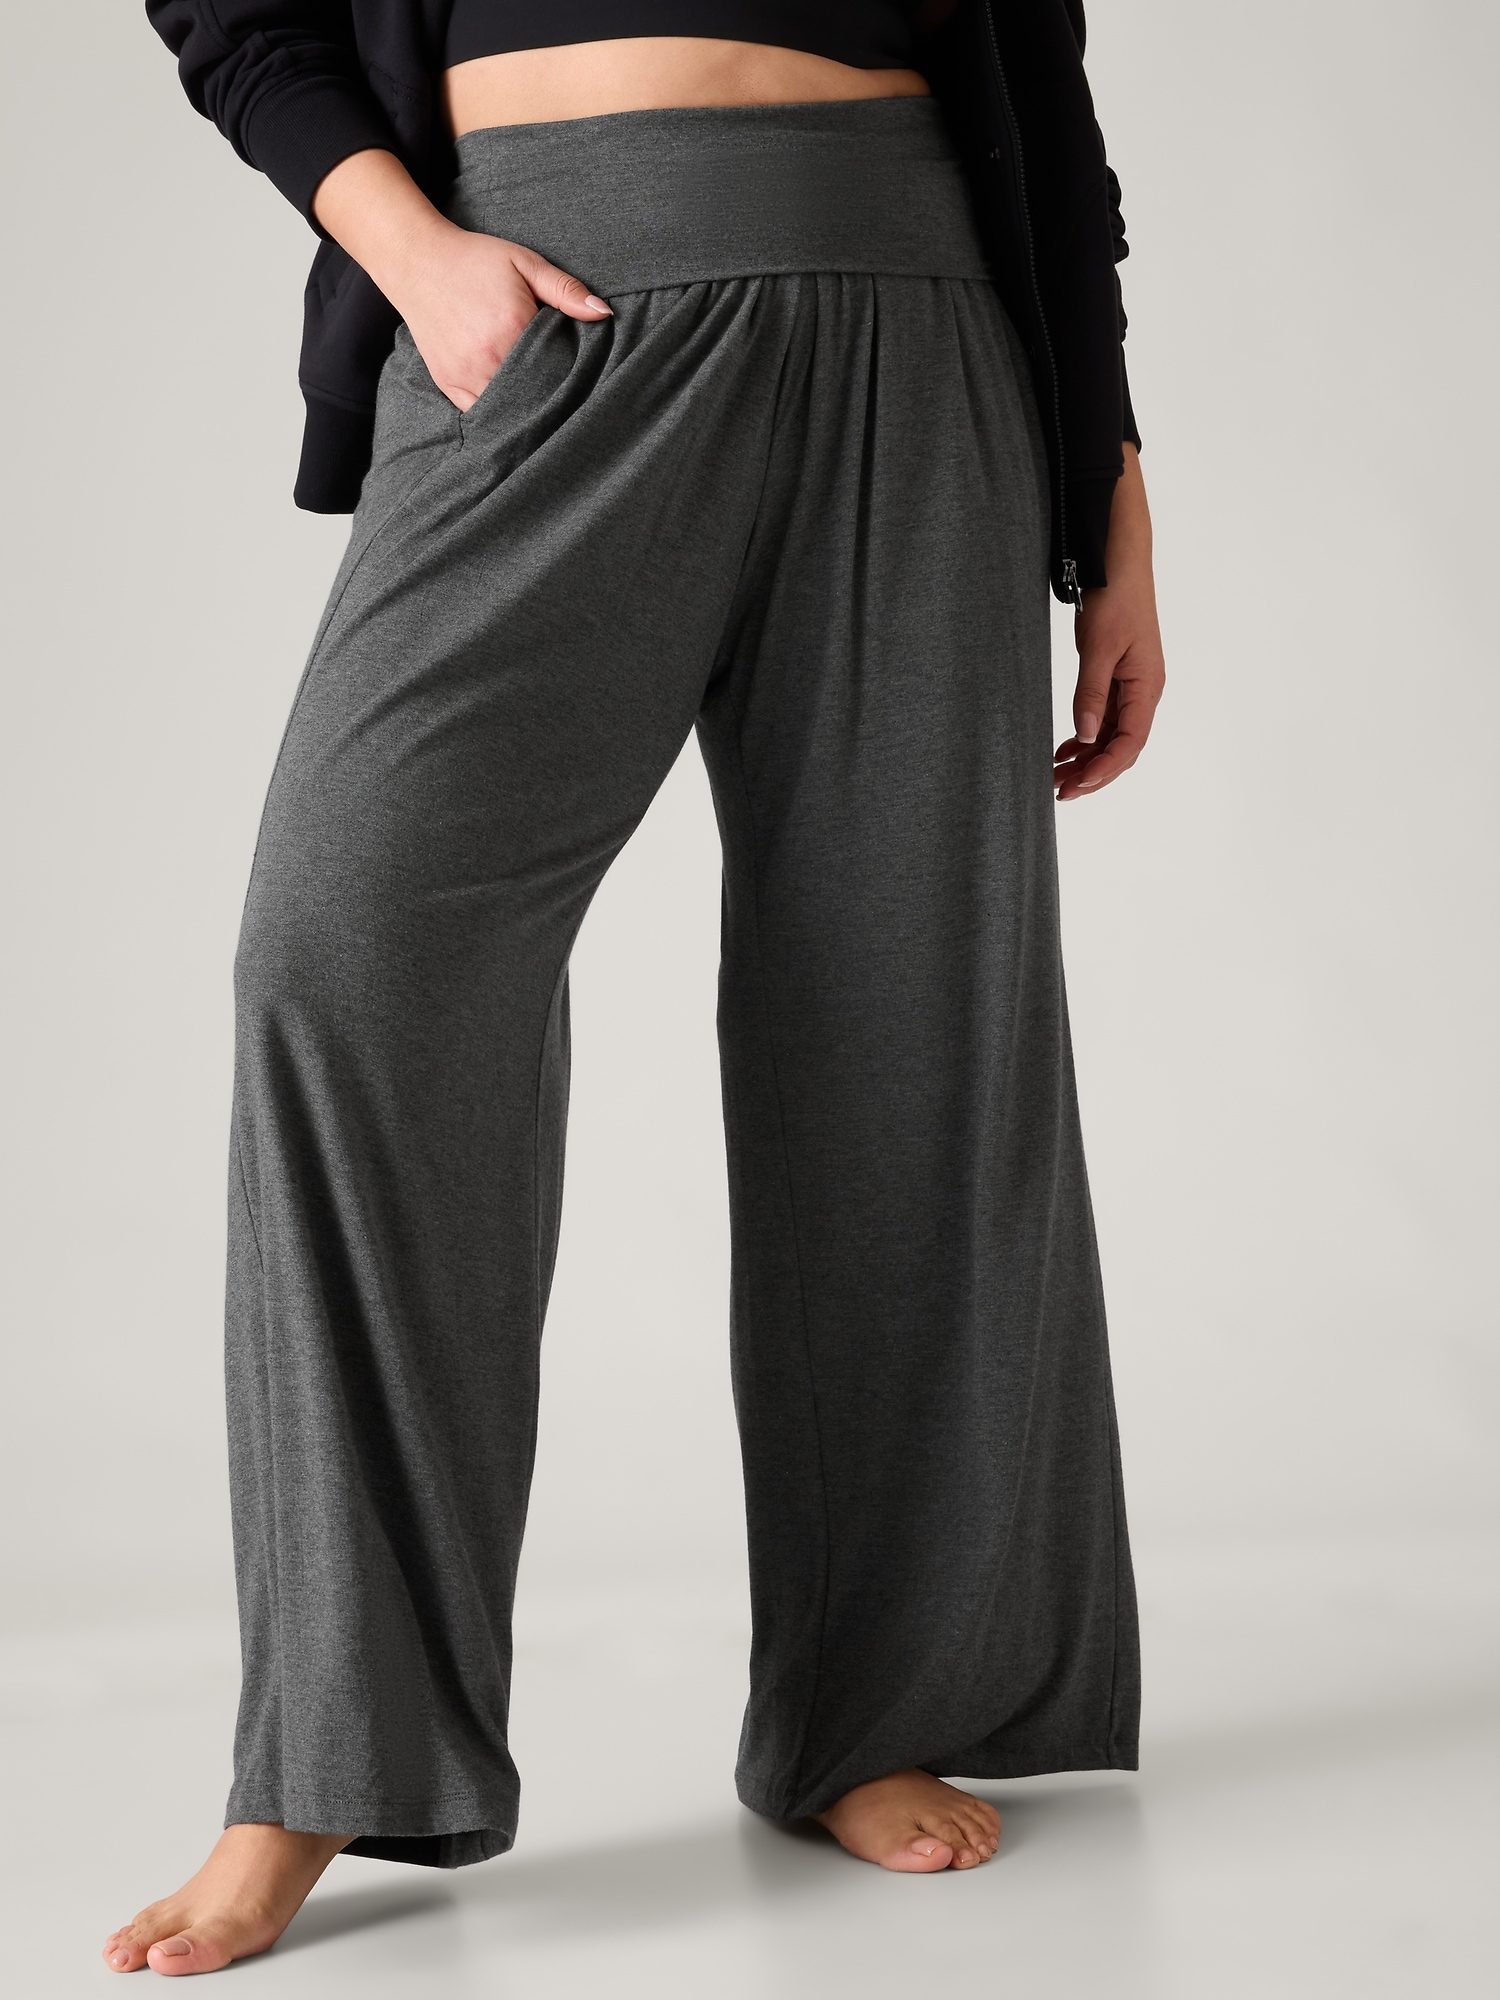 Women's Yoga Sports Stitching Street Hipster Trousers Casual Wide-leg Pants